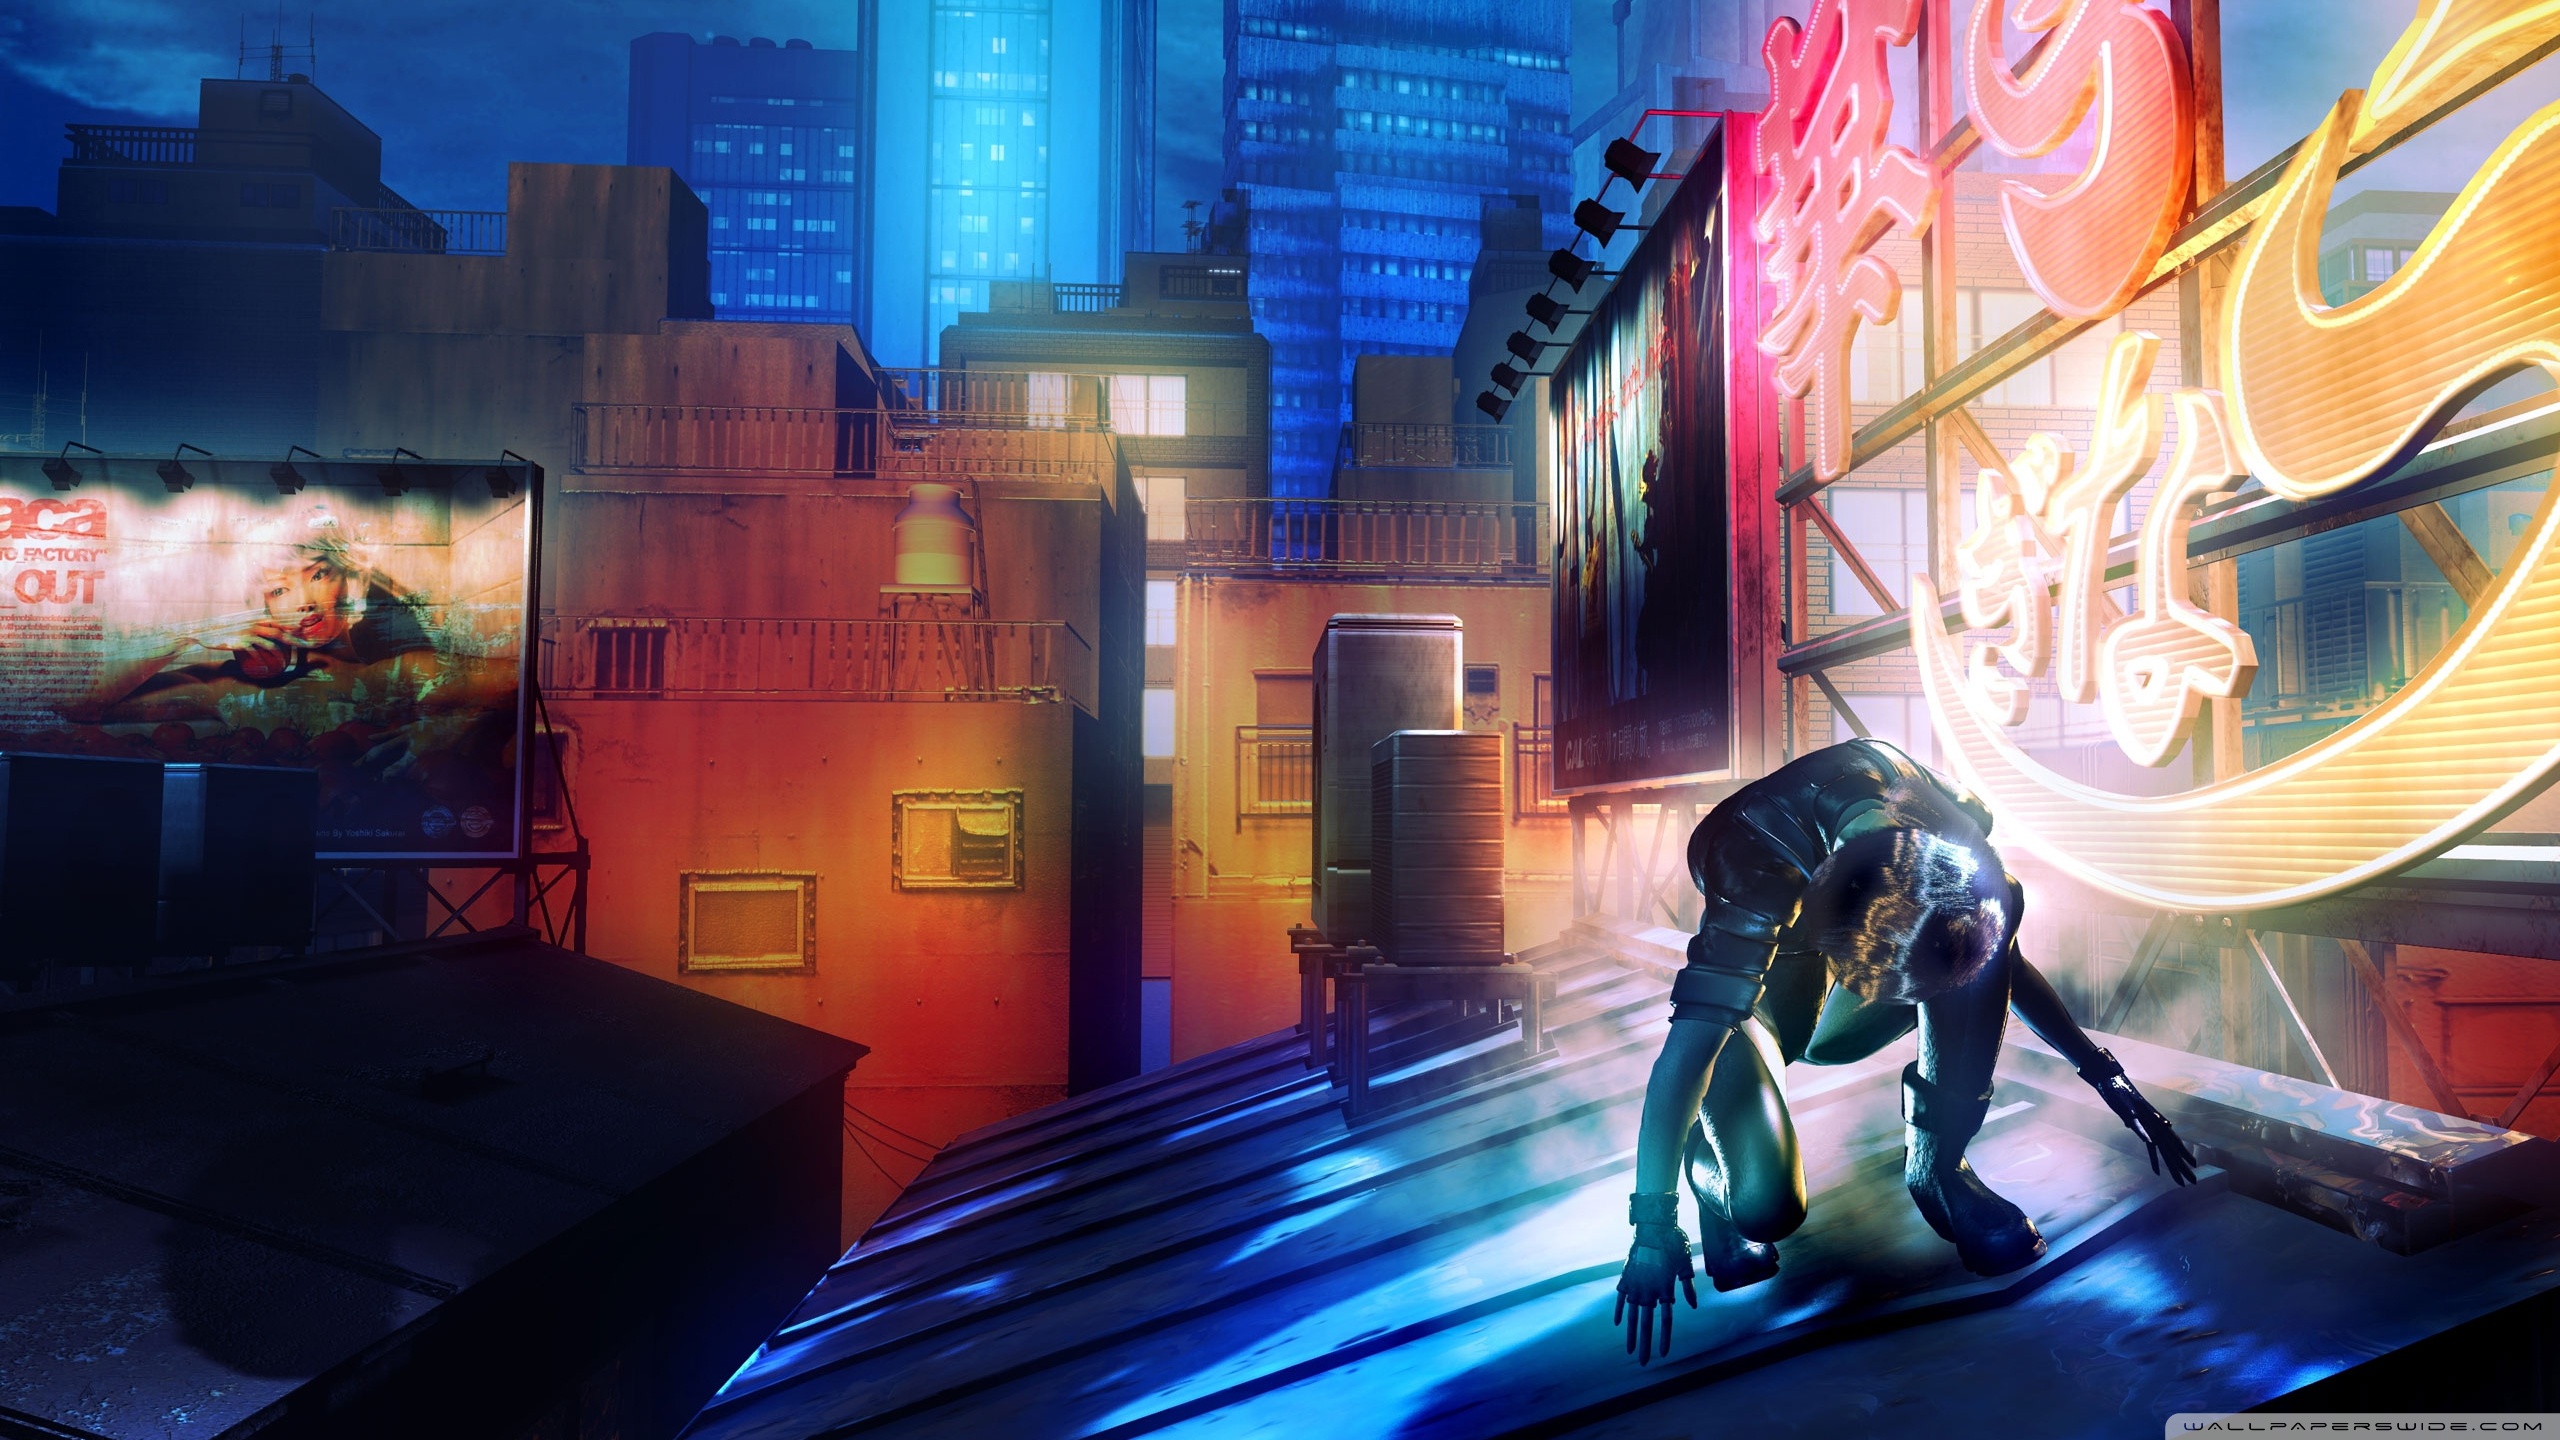 Wallpaper  1920x1200 px Mirrors Edge video games 1920x1200   CoolWallpapers  680981  HD Wallpapers  WallHere